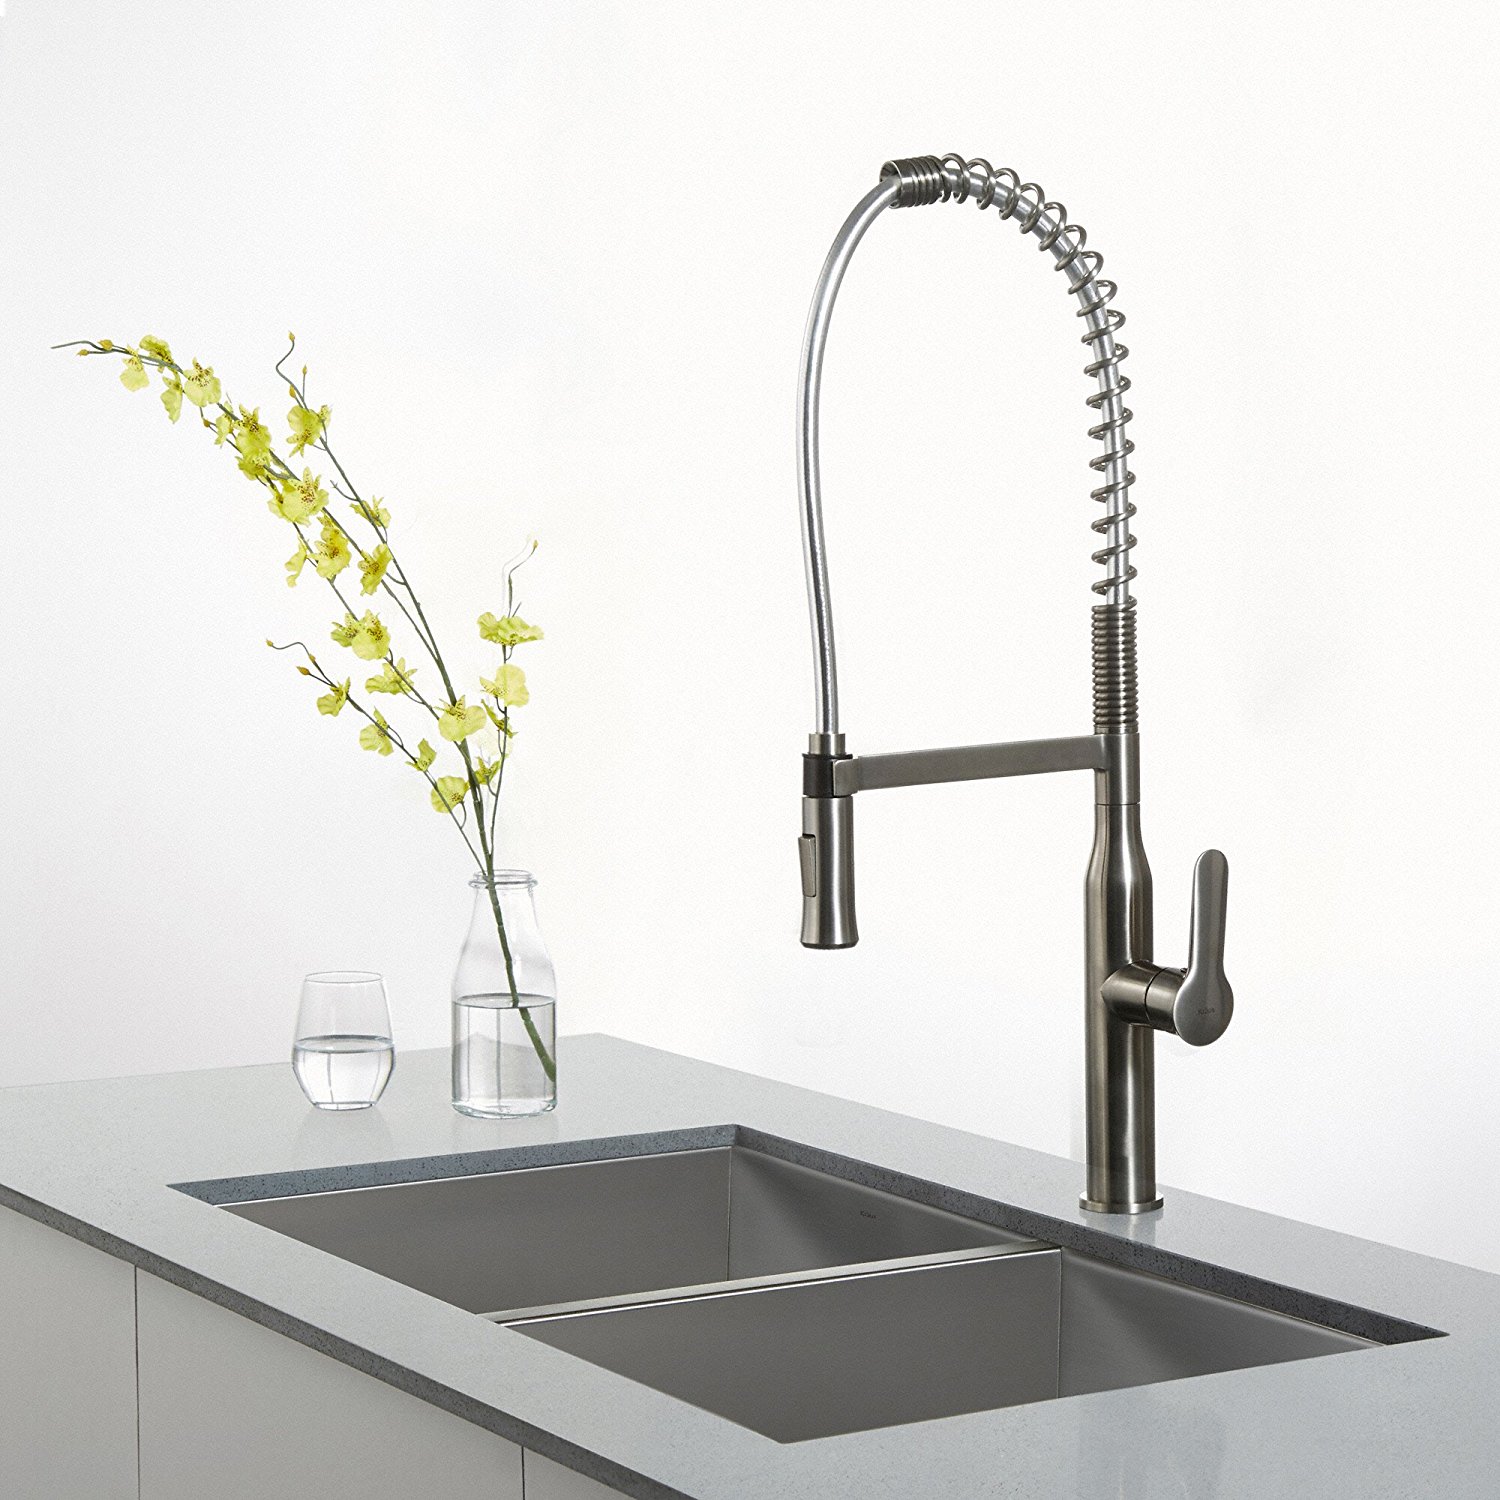 Kraus Kpf 1650ss Reviews Know Your Faucet Before You Get It